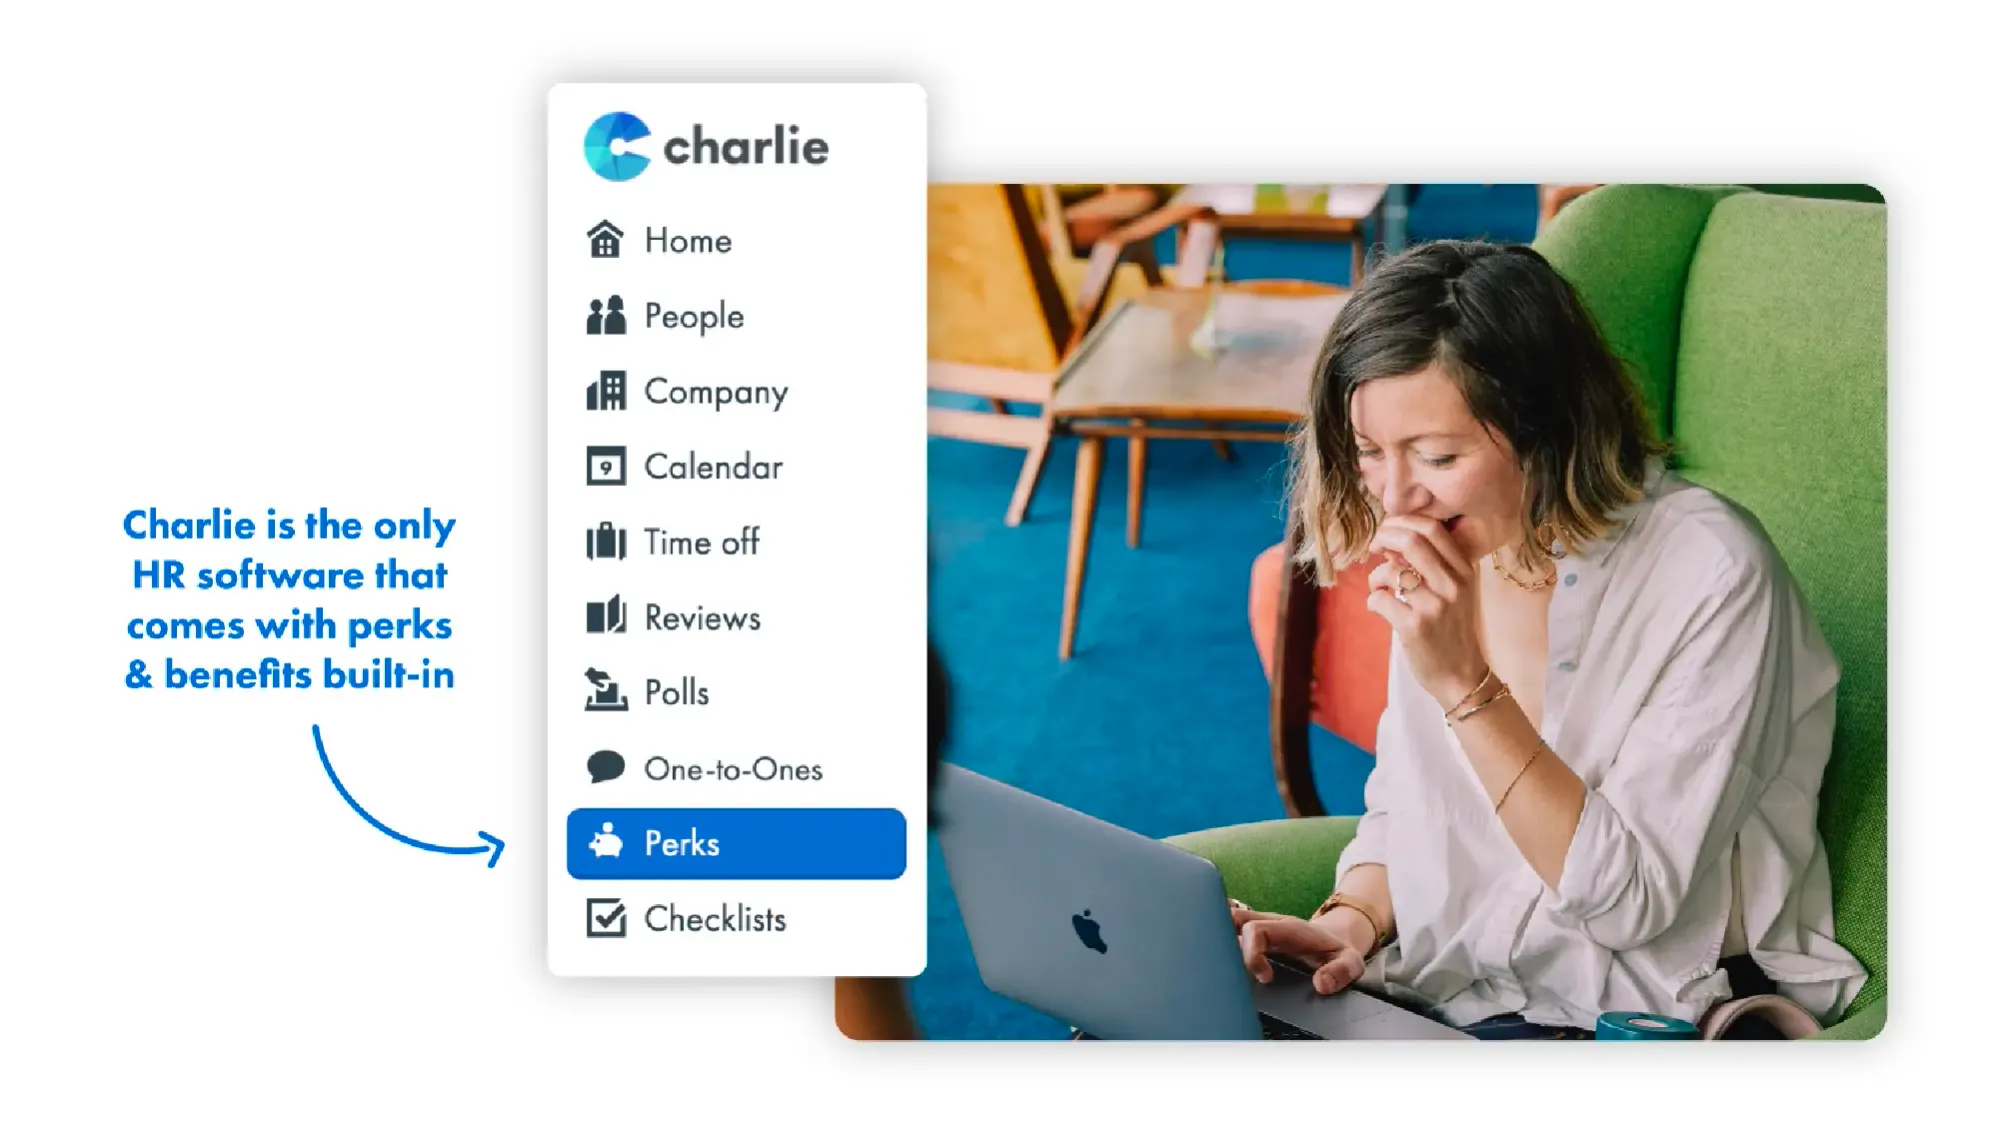 Charlie is the only HR software with built-in perks platform